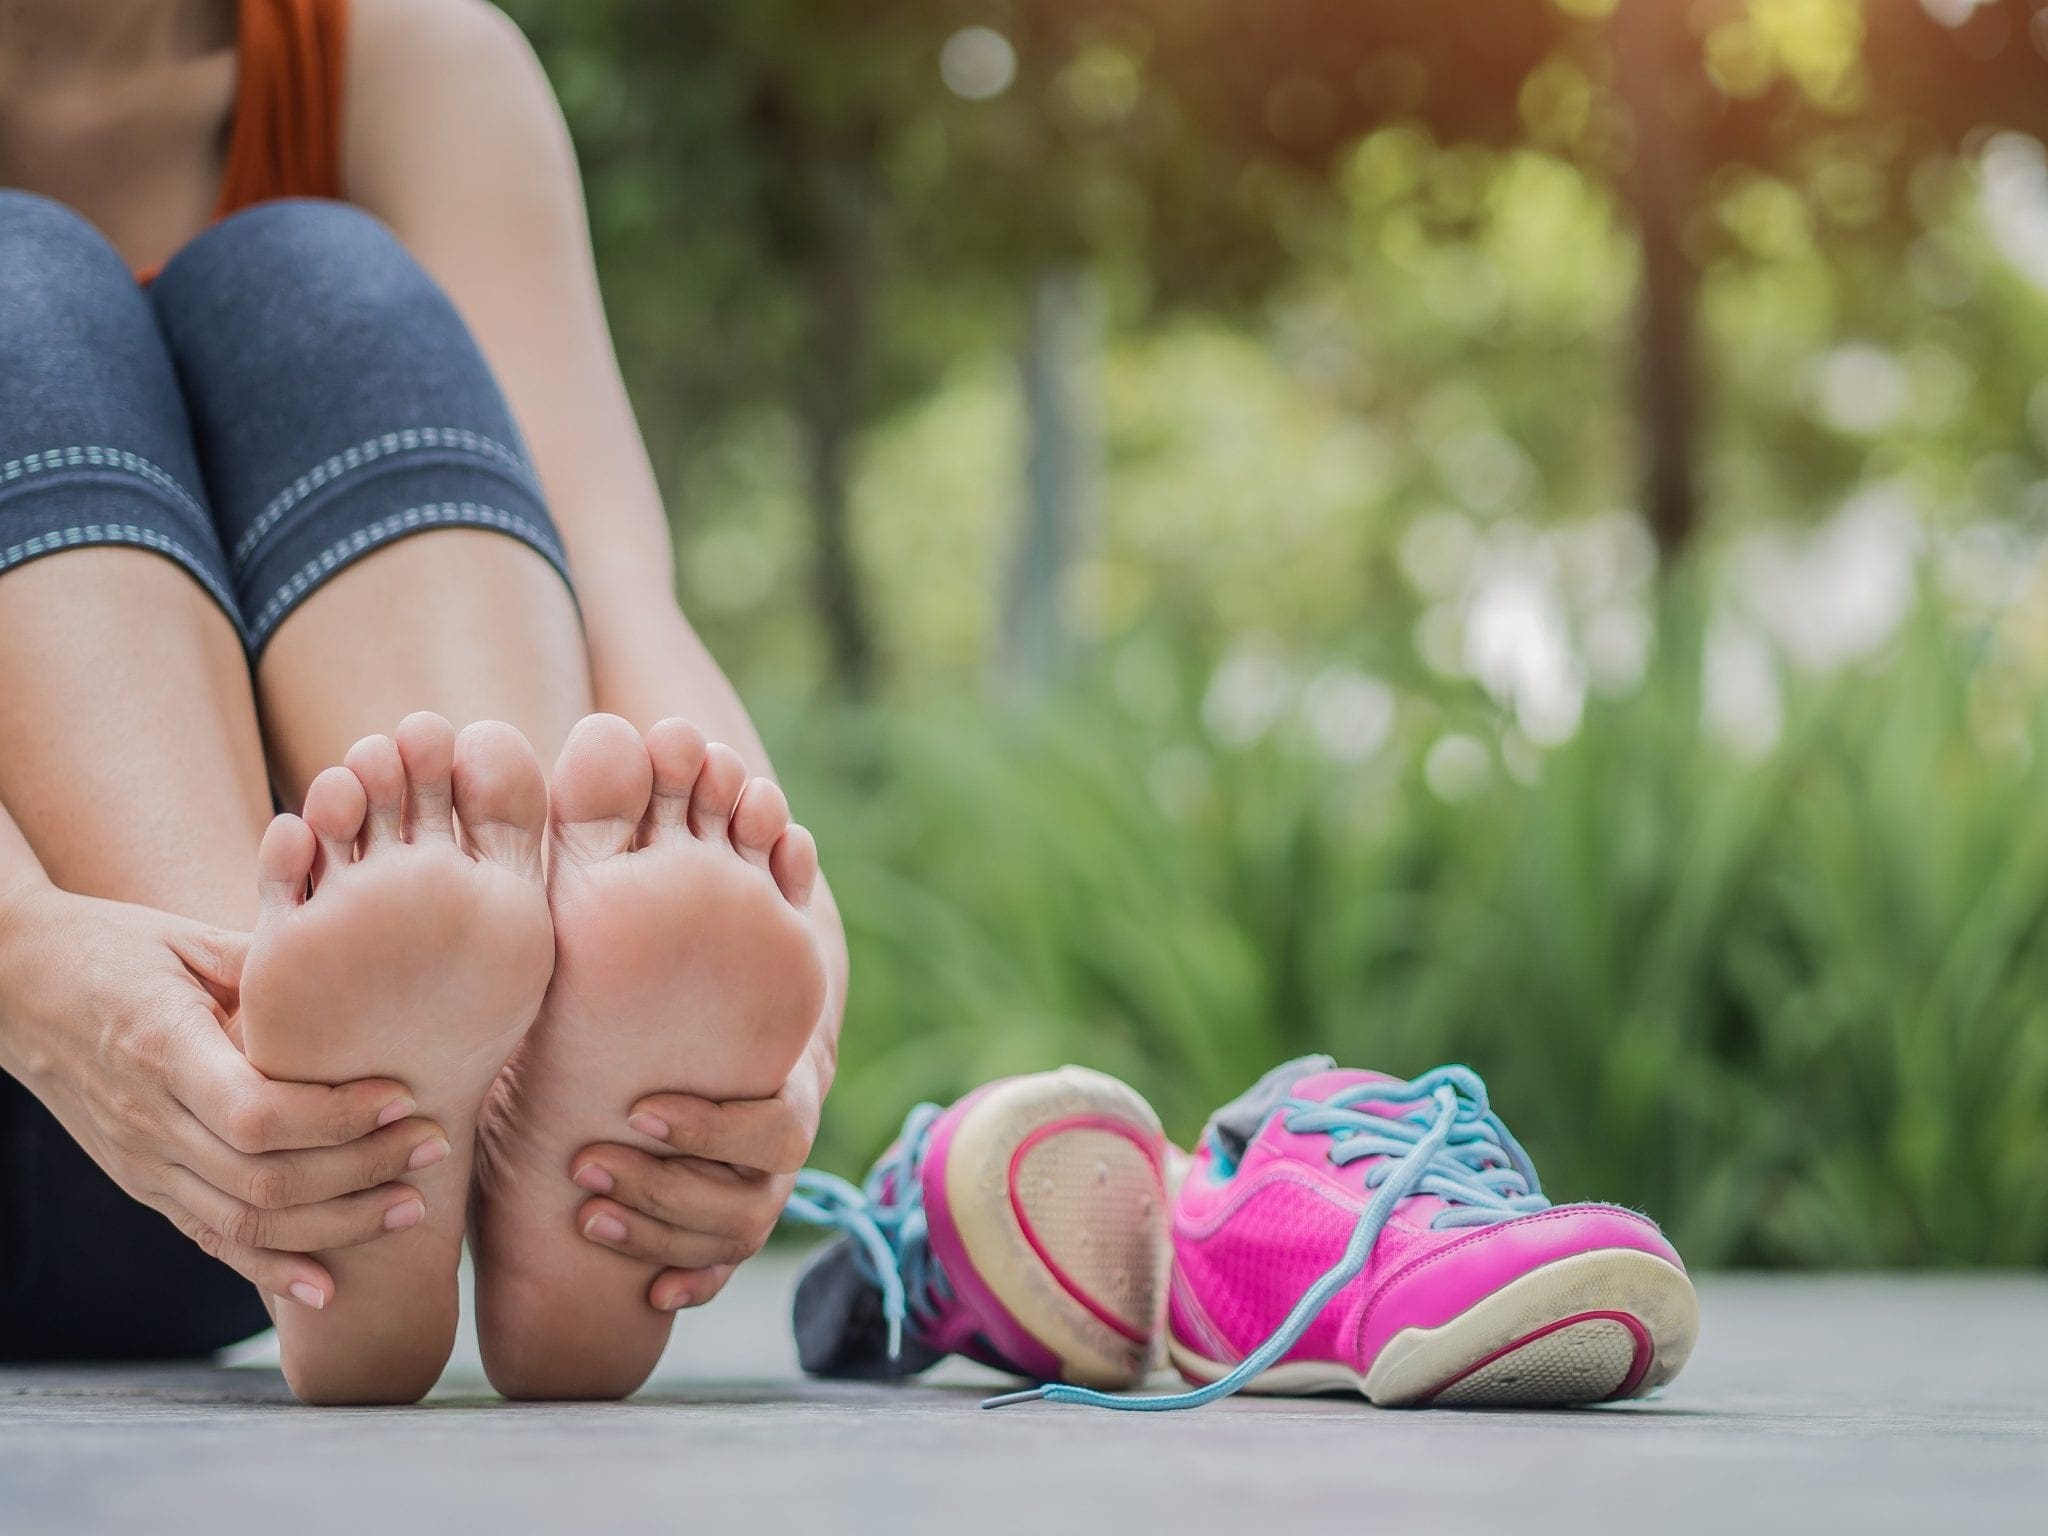 10 Reasons Your Toes Are Cramping